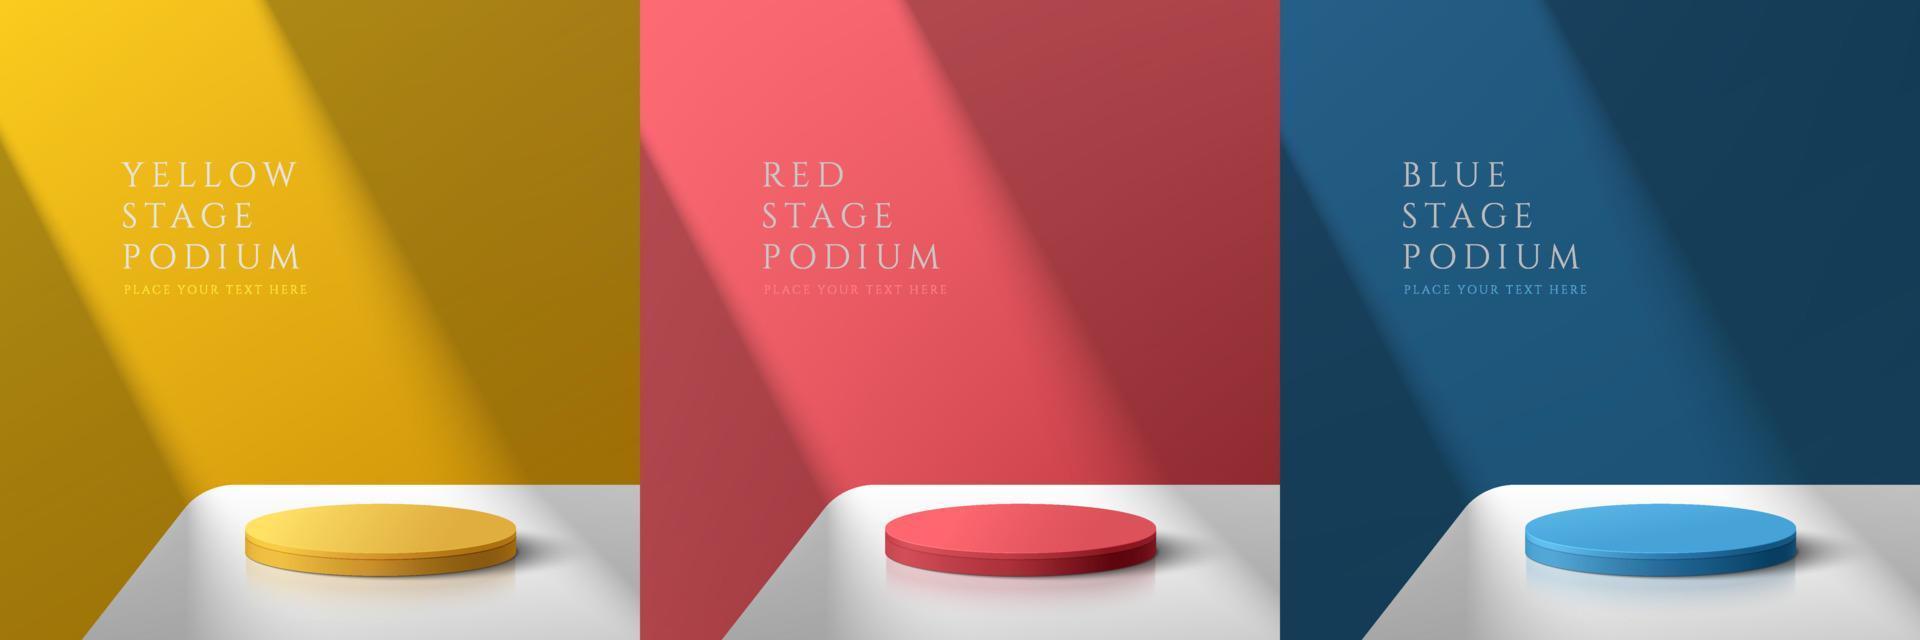 Set of yellow, dark blue and red realistic 3d cylinder pedestal podium on white table in abstract rooms. Vector rendering geometric forms. Colorful minimal scene. Stage for showcase, Product display.